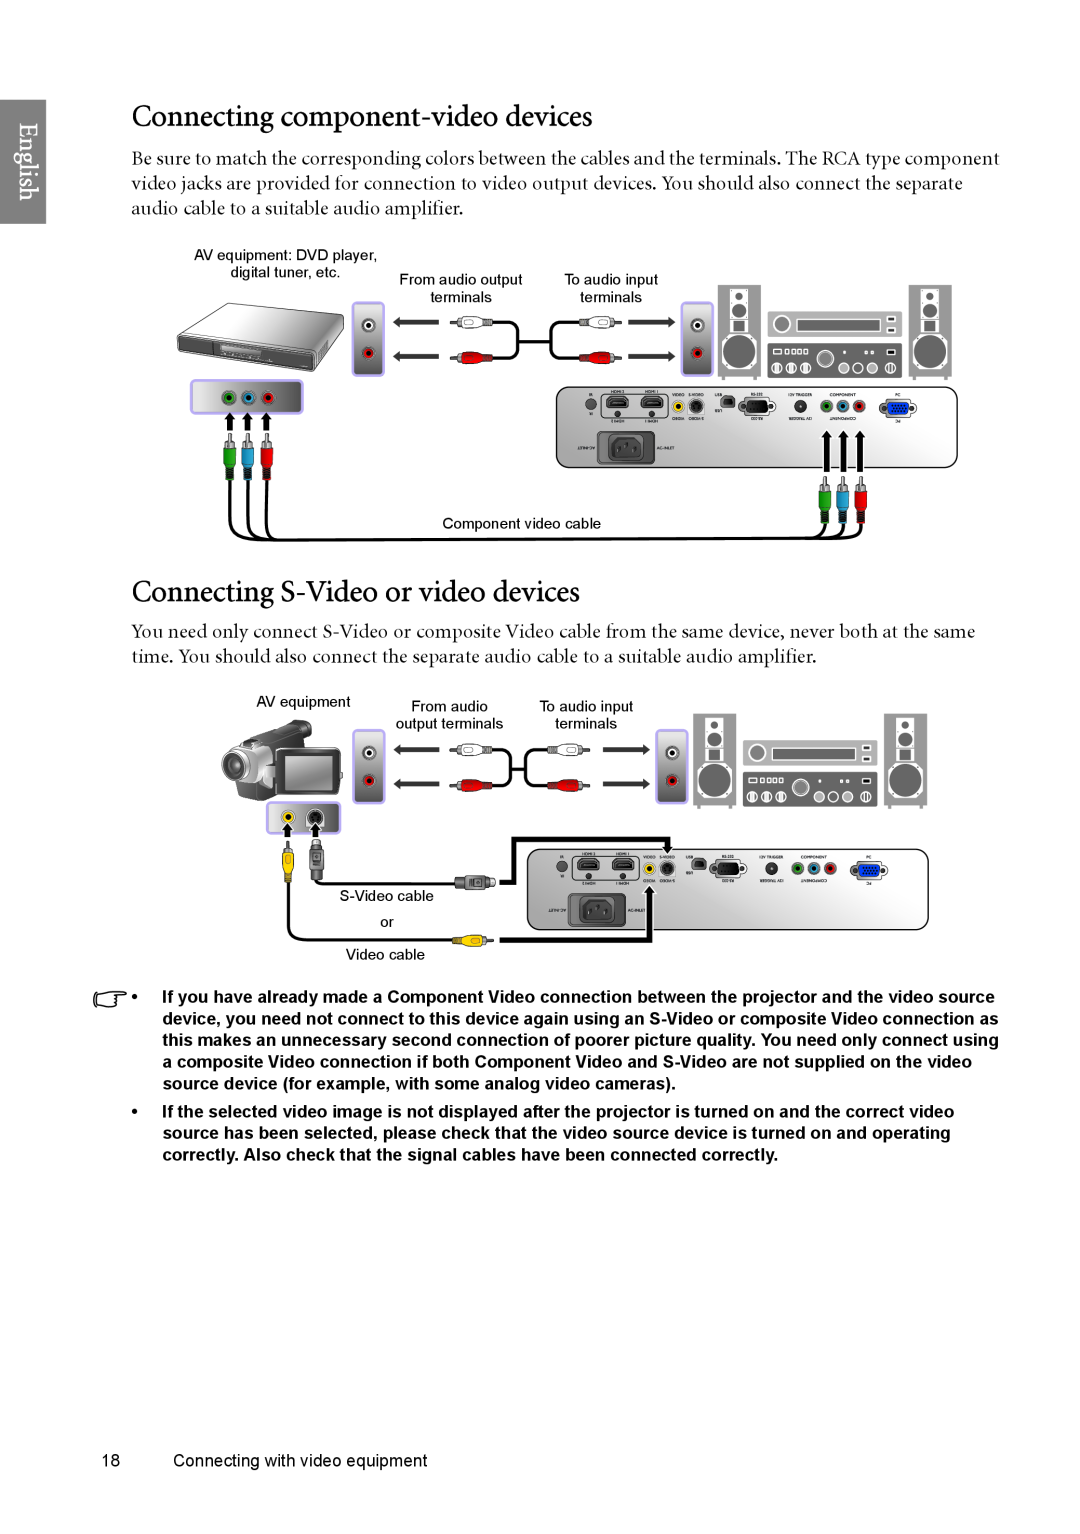 BenQ W6500 user manual Connecting component-video devices, Connecting S-Video or video devices, English 